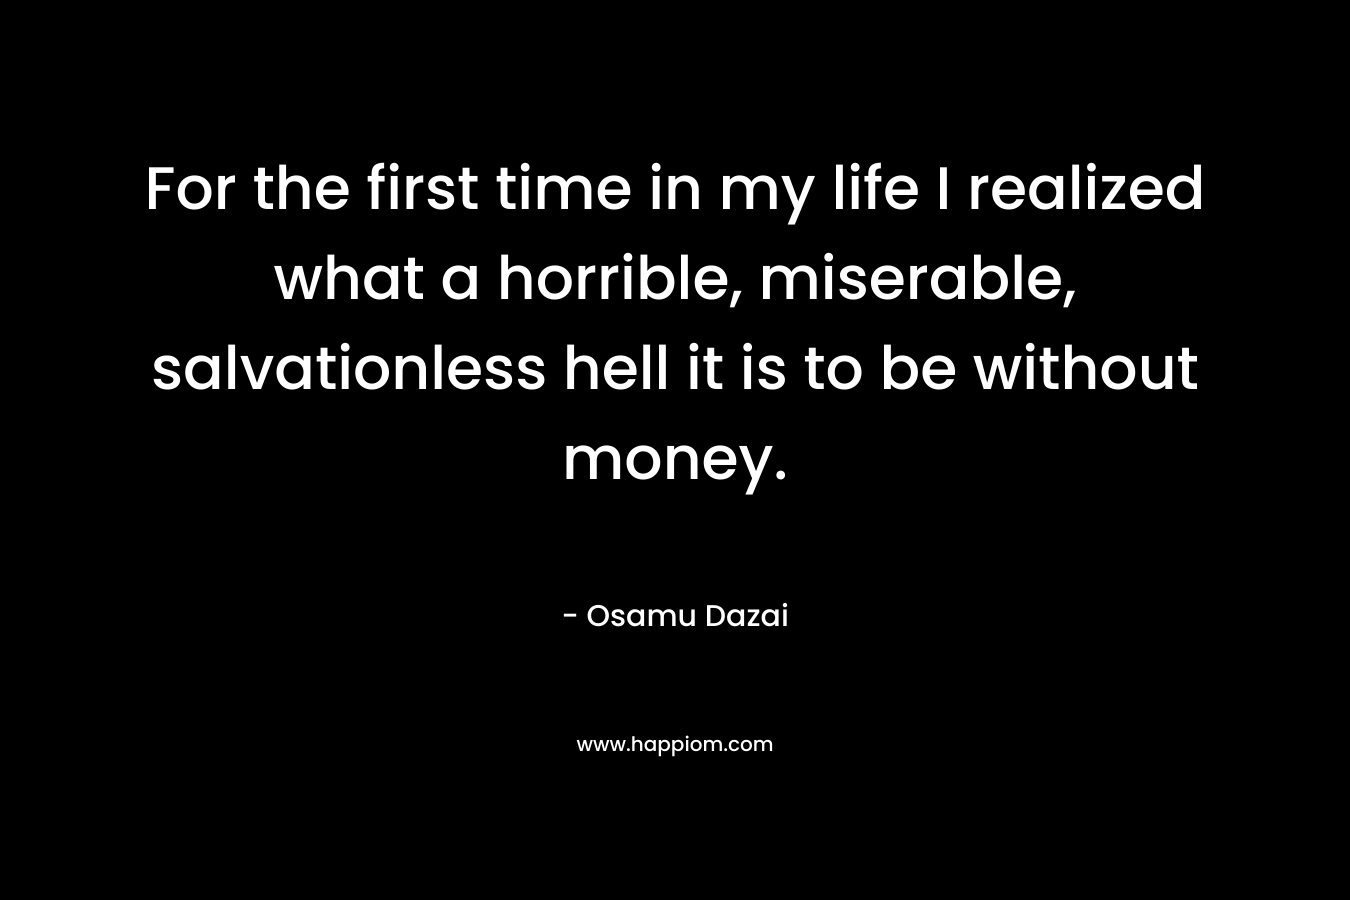 For the first time in my life I realized what a horrible, miserable, salvationless hell it is to be without money.